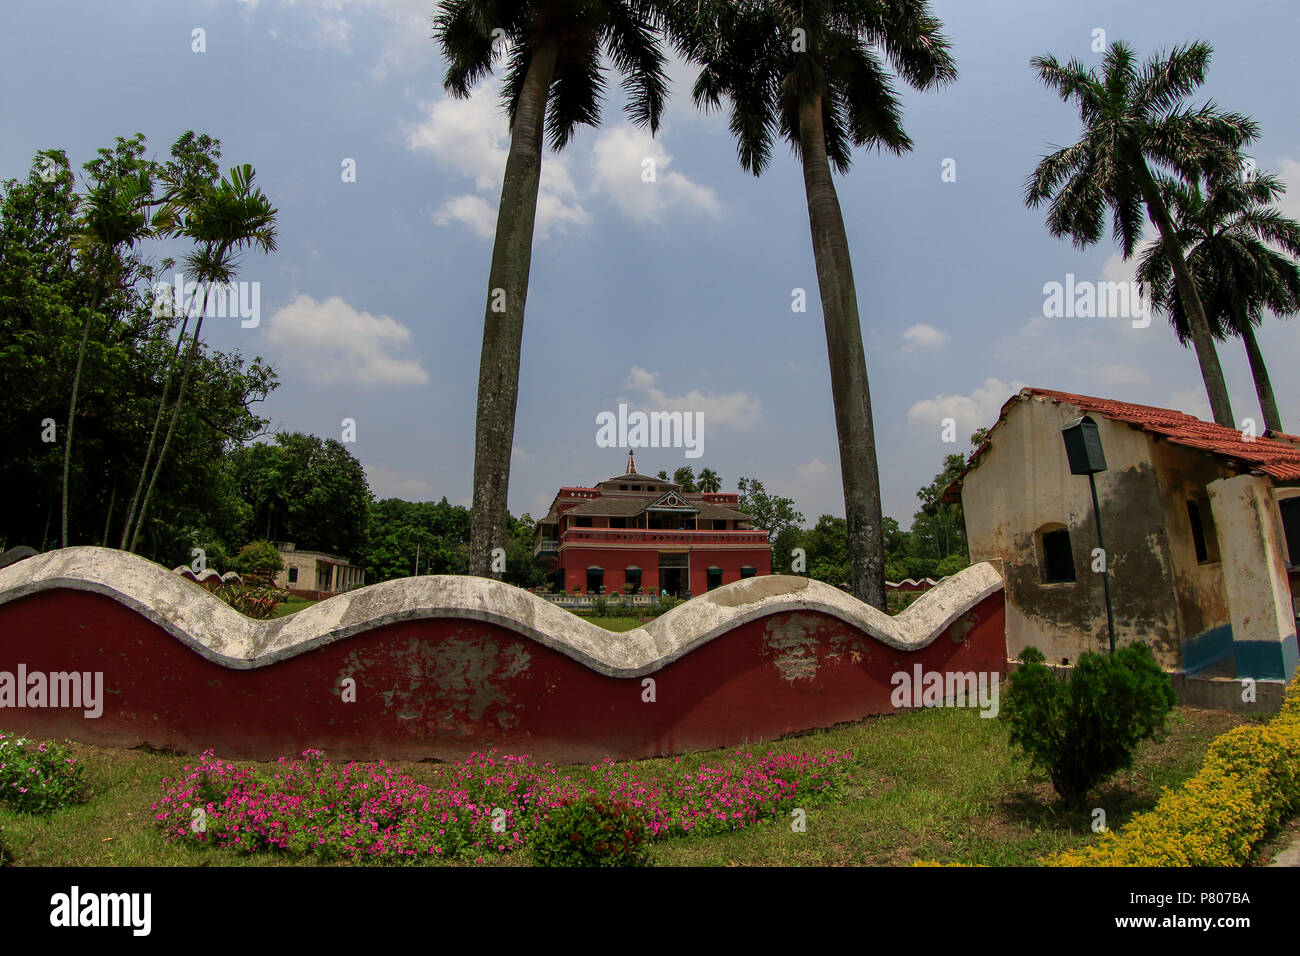 The Shilaidaha Kuthibari in Kushtia, where Poet Rabindranath Tagor occasionally spent time and wrote many poems and different kinds of writings. Bangl Stock Photo